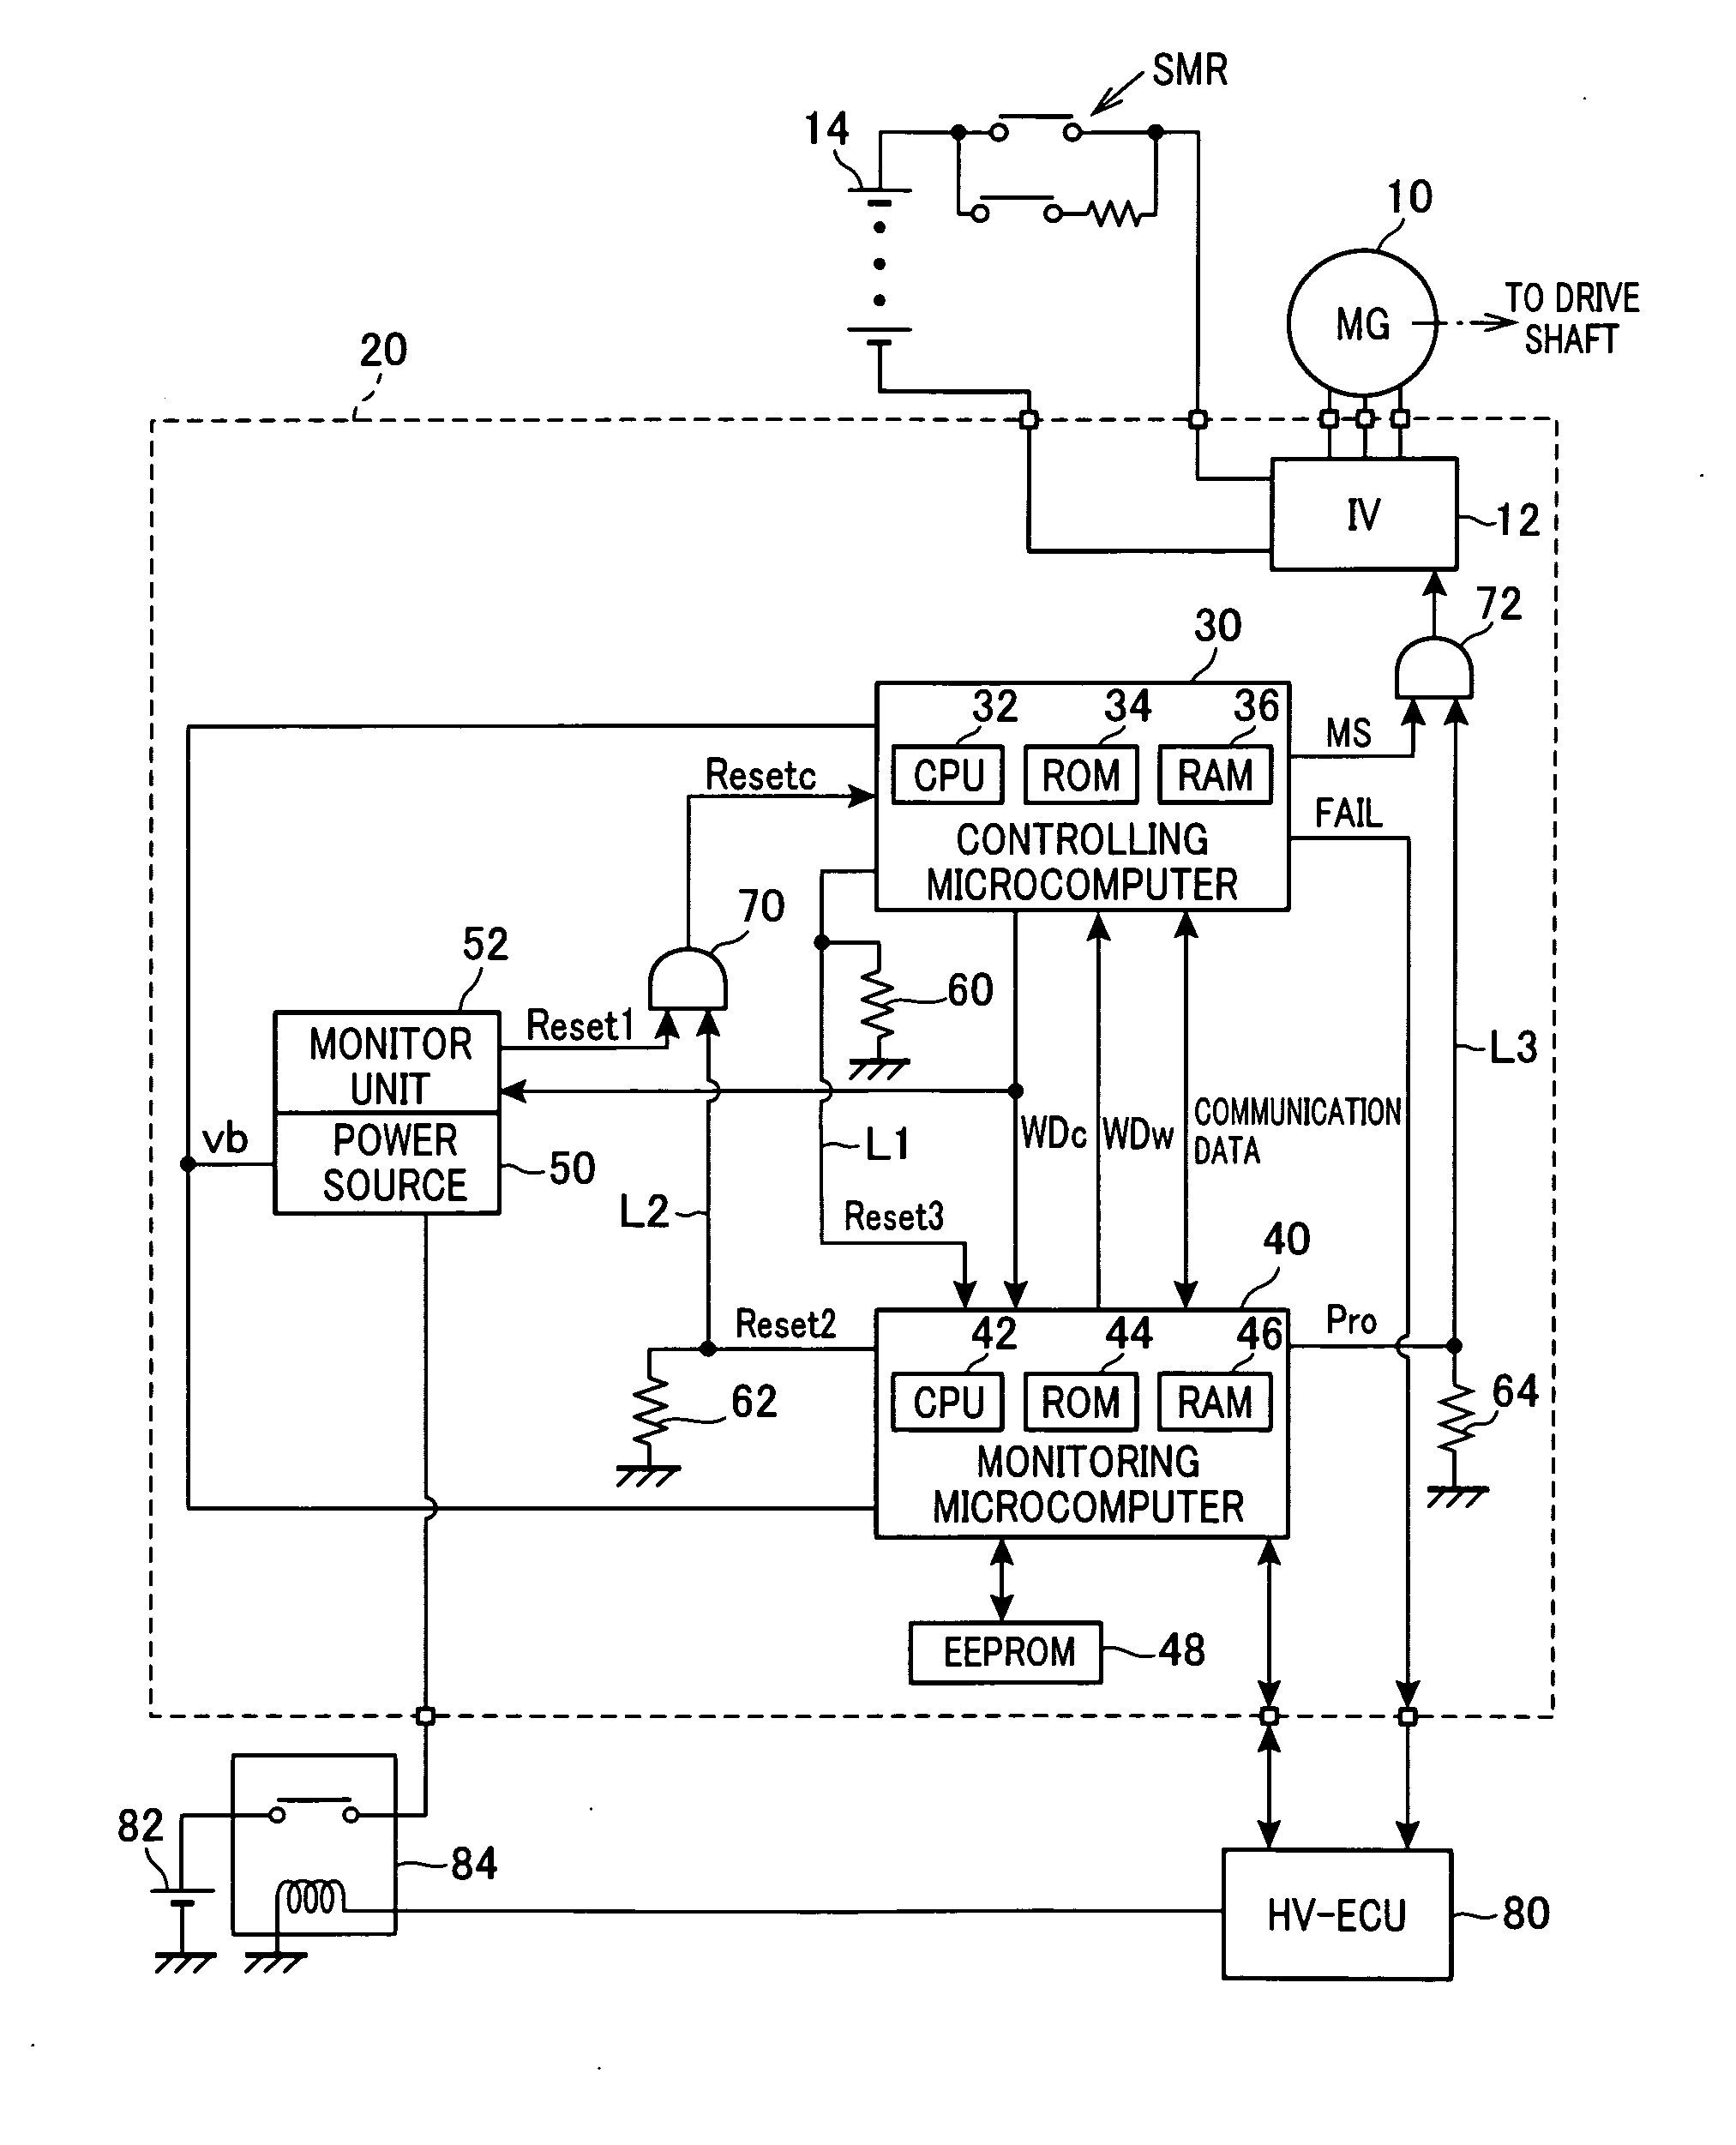 Electronic control apparatus for a vehicle